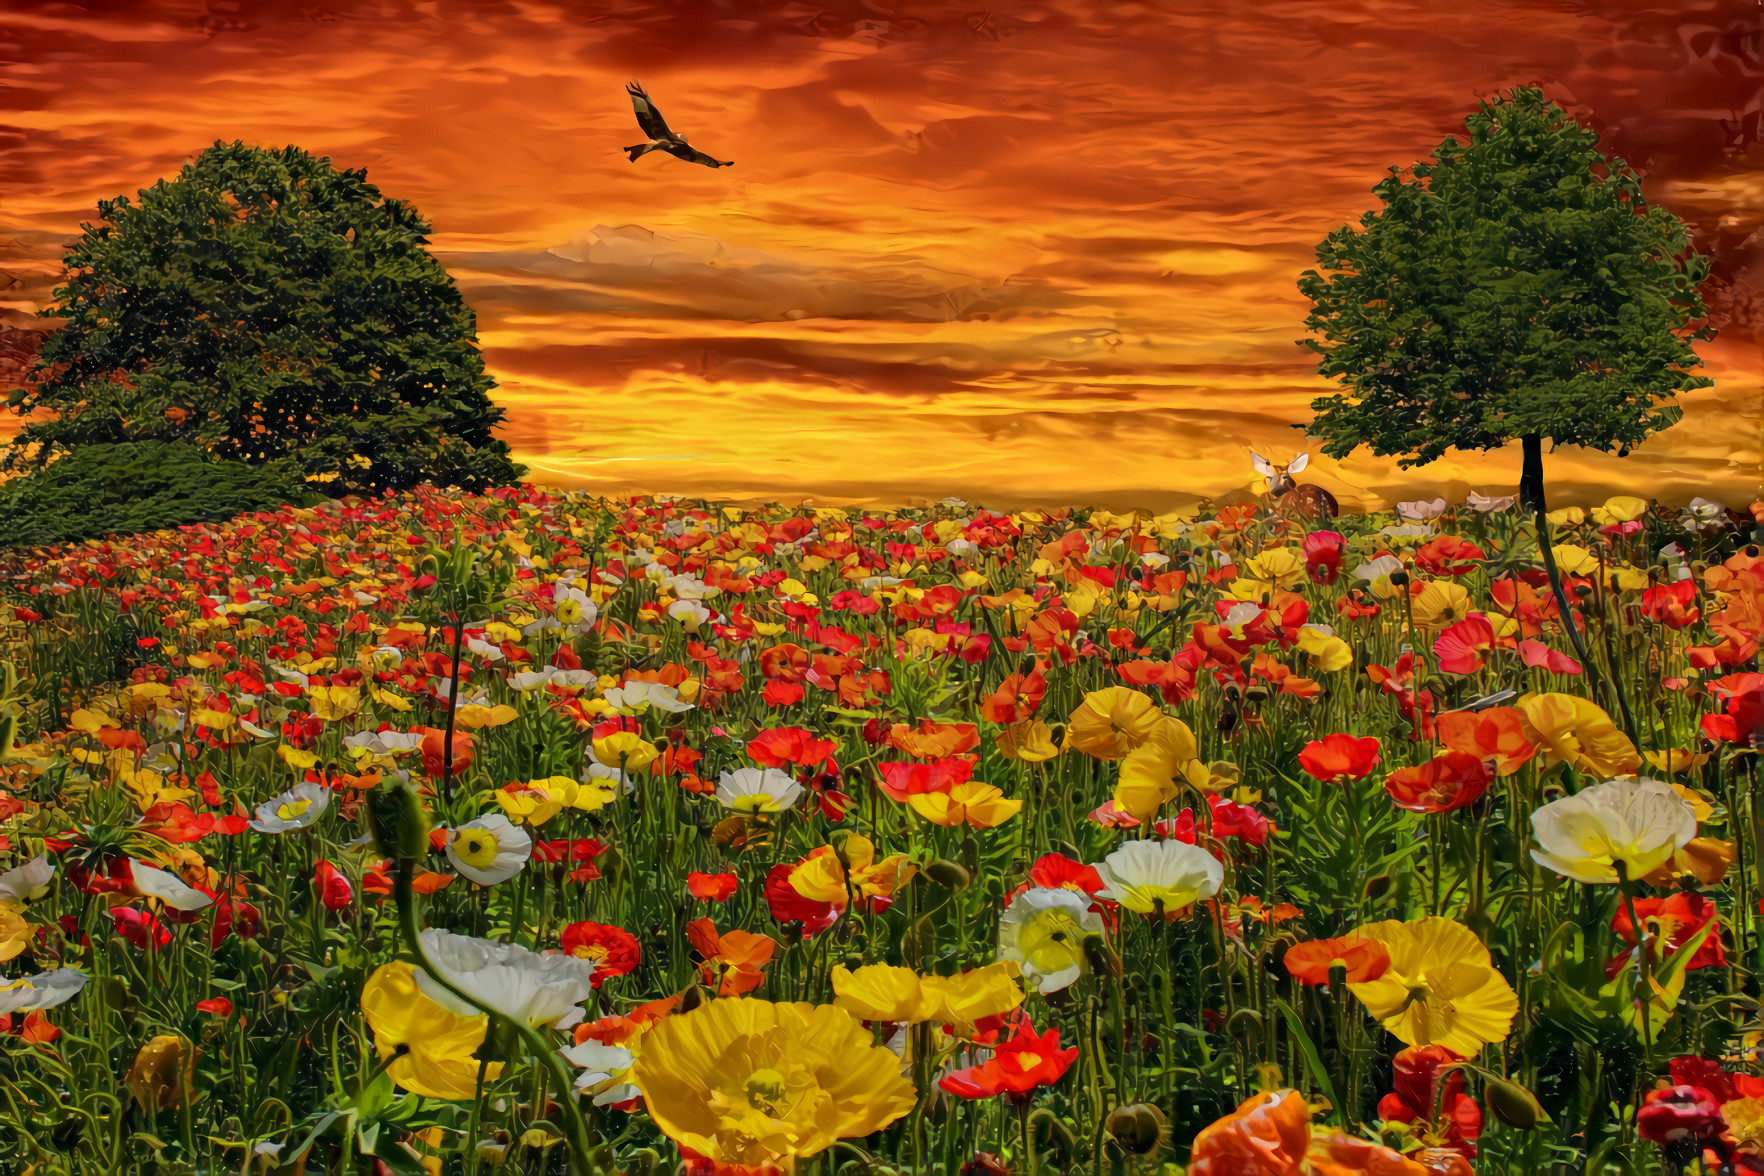 Sunset over the Poppy Meadow